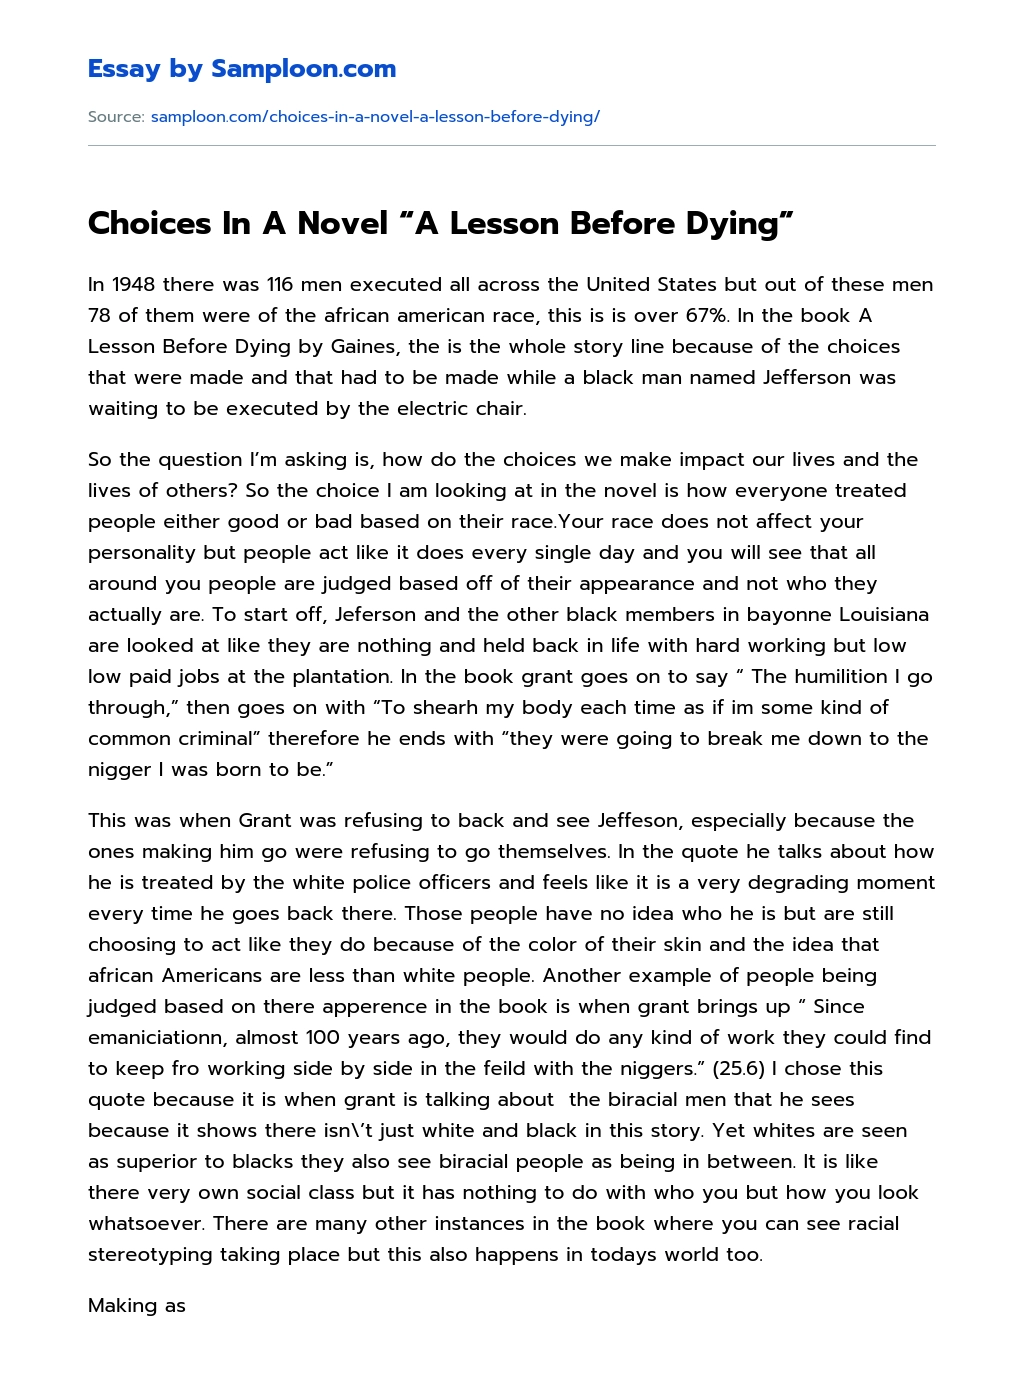 Choices In A Novel “A Lesson Before Dying” essay